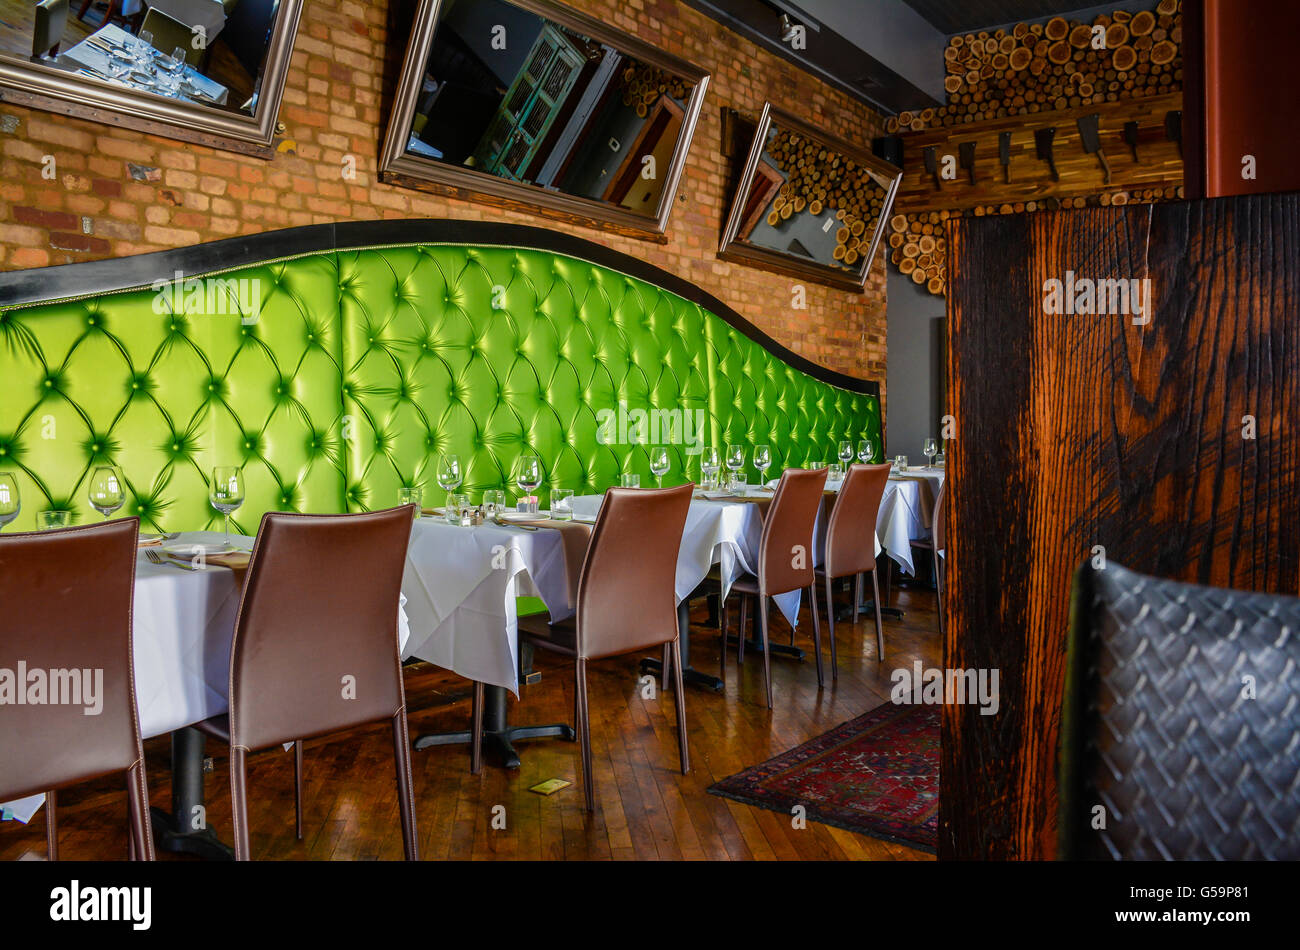 The posh lime green upholstered booths with brick-lined walls in Interior of the Cork & Cow Restaurant in historic Franklin, TN Stock Photo